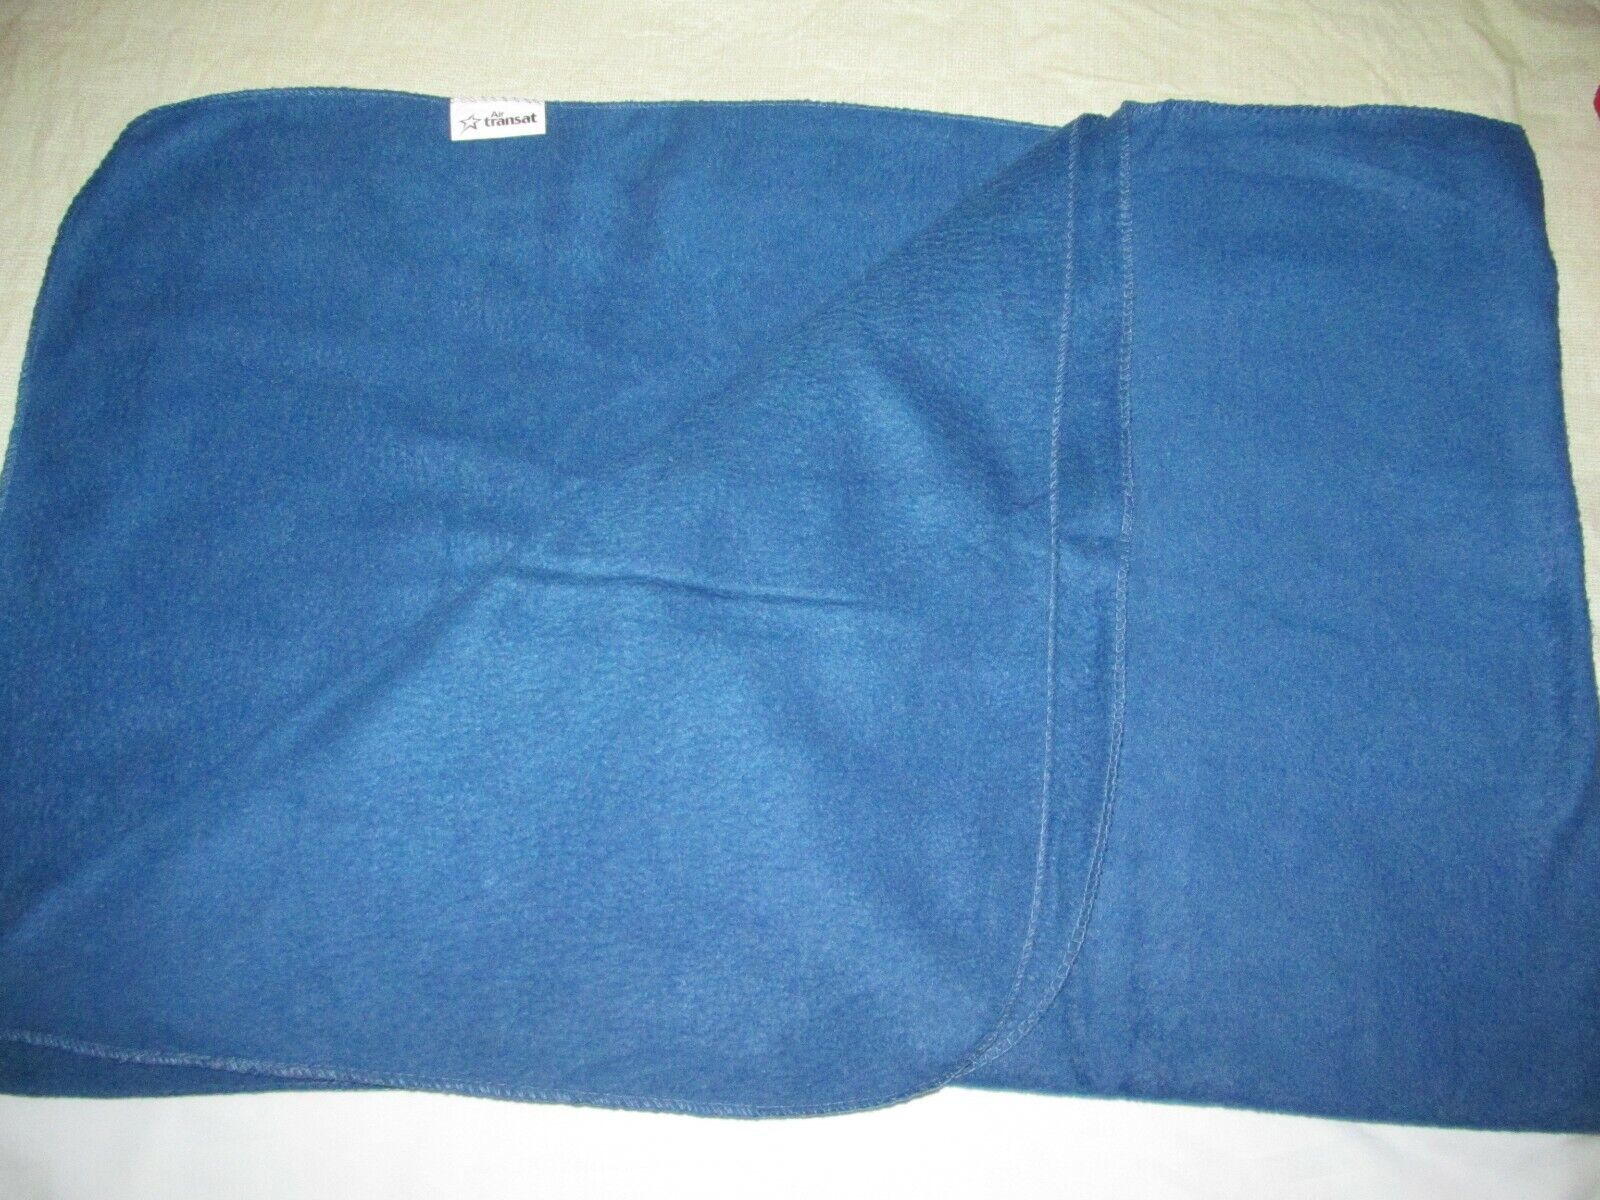 AIR TRANSAT CANADA blue fleece airline blanket travel couch throw